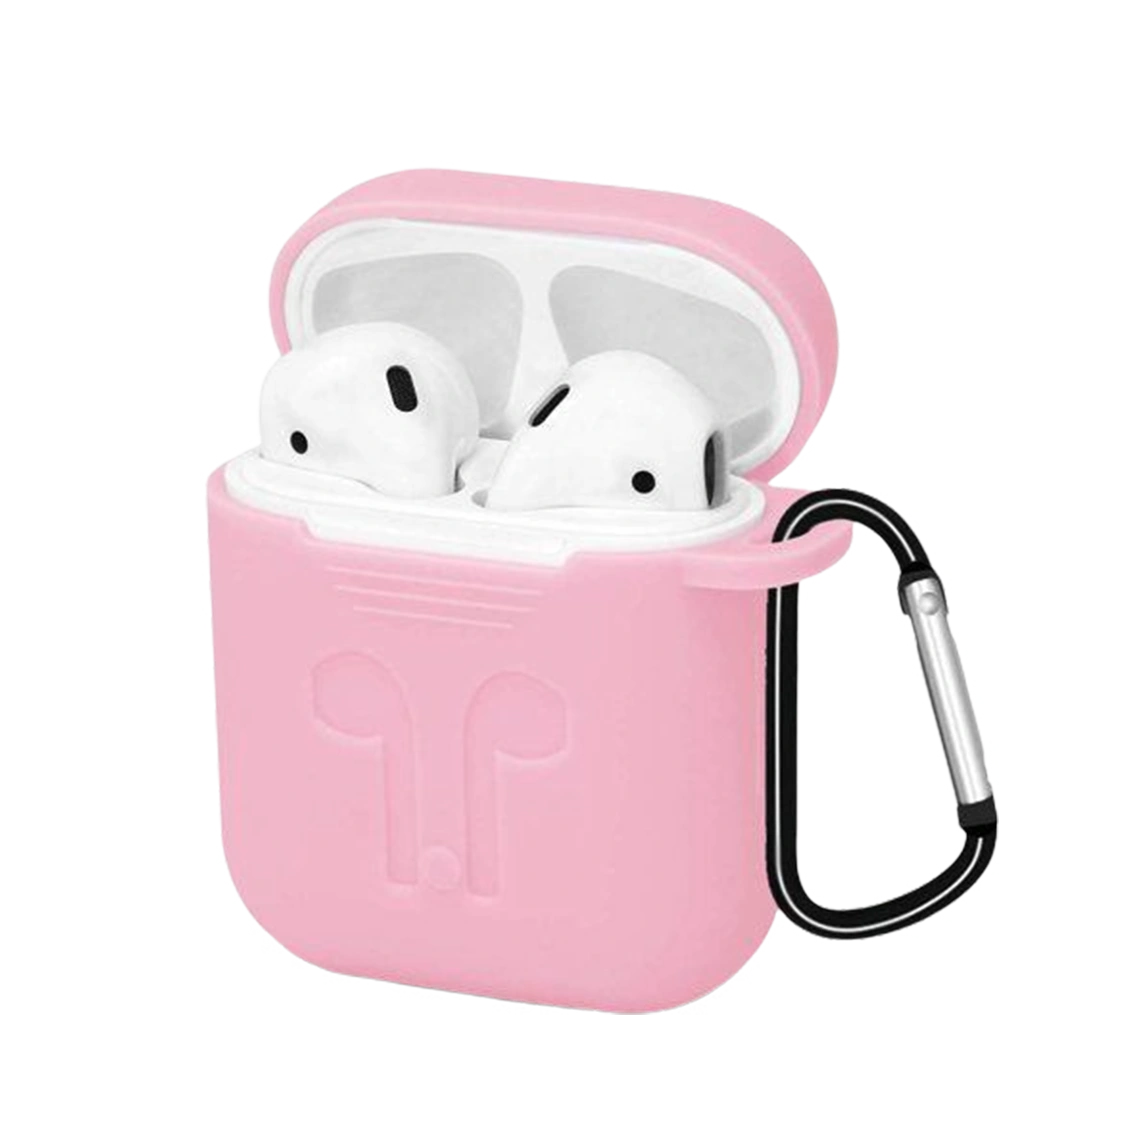 Case for Airpods 1 and 2